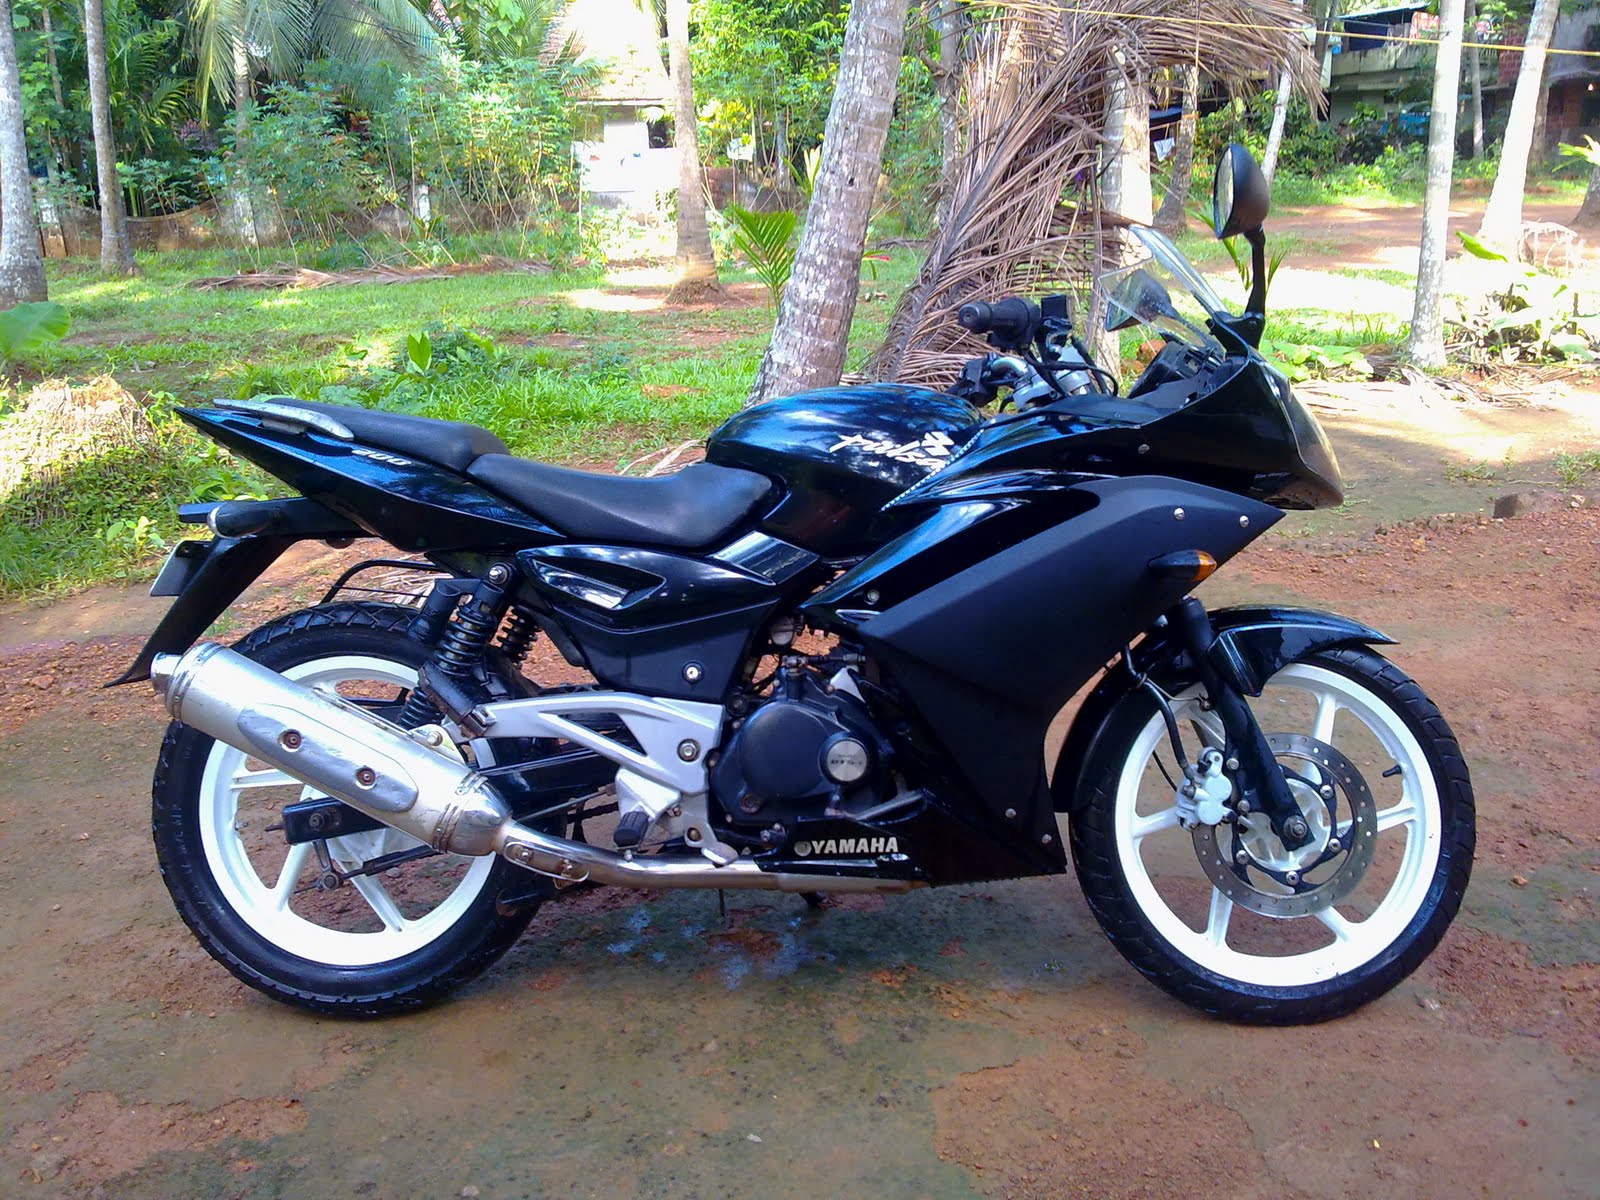 2008 Model Pulsar 200 modified to r15 My modified Pulsar 200